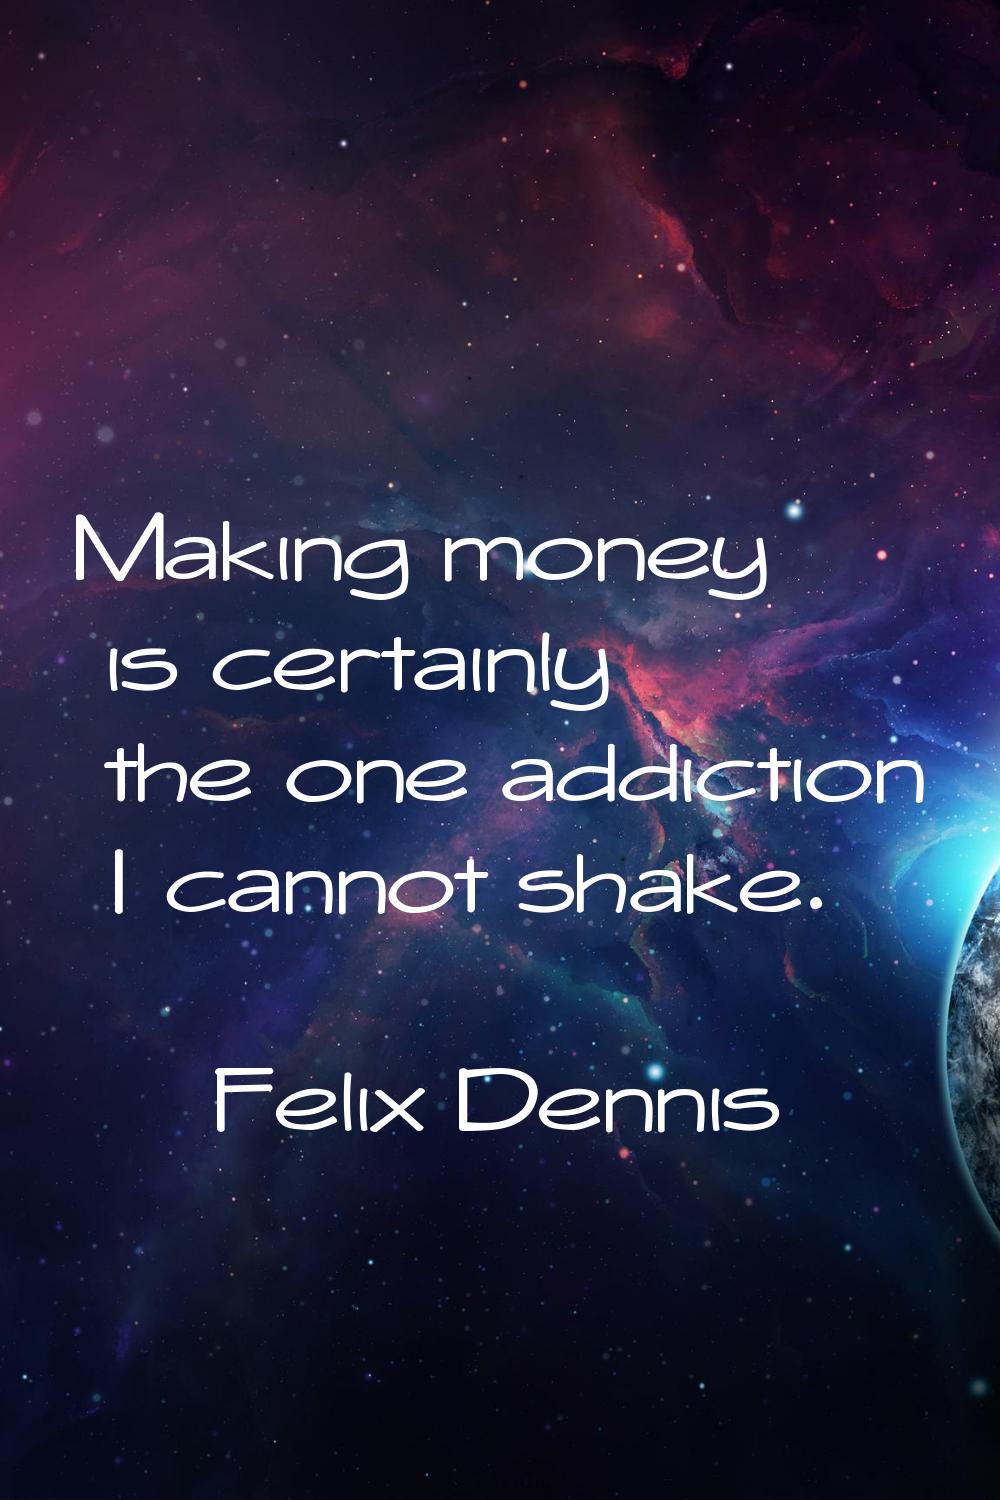 Making money is certainly the one addiction I cannot shake.